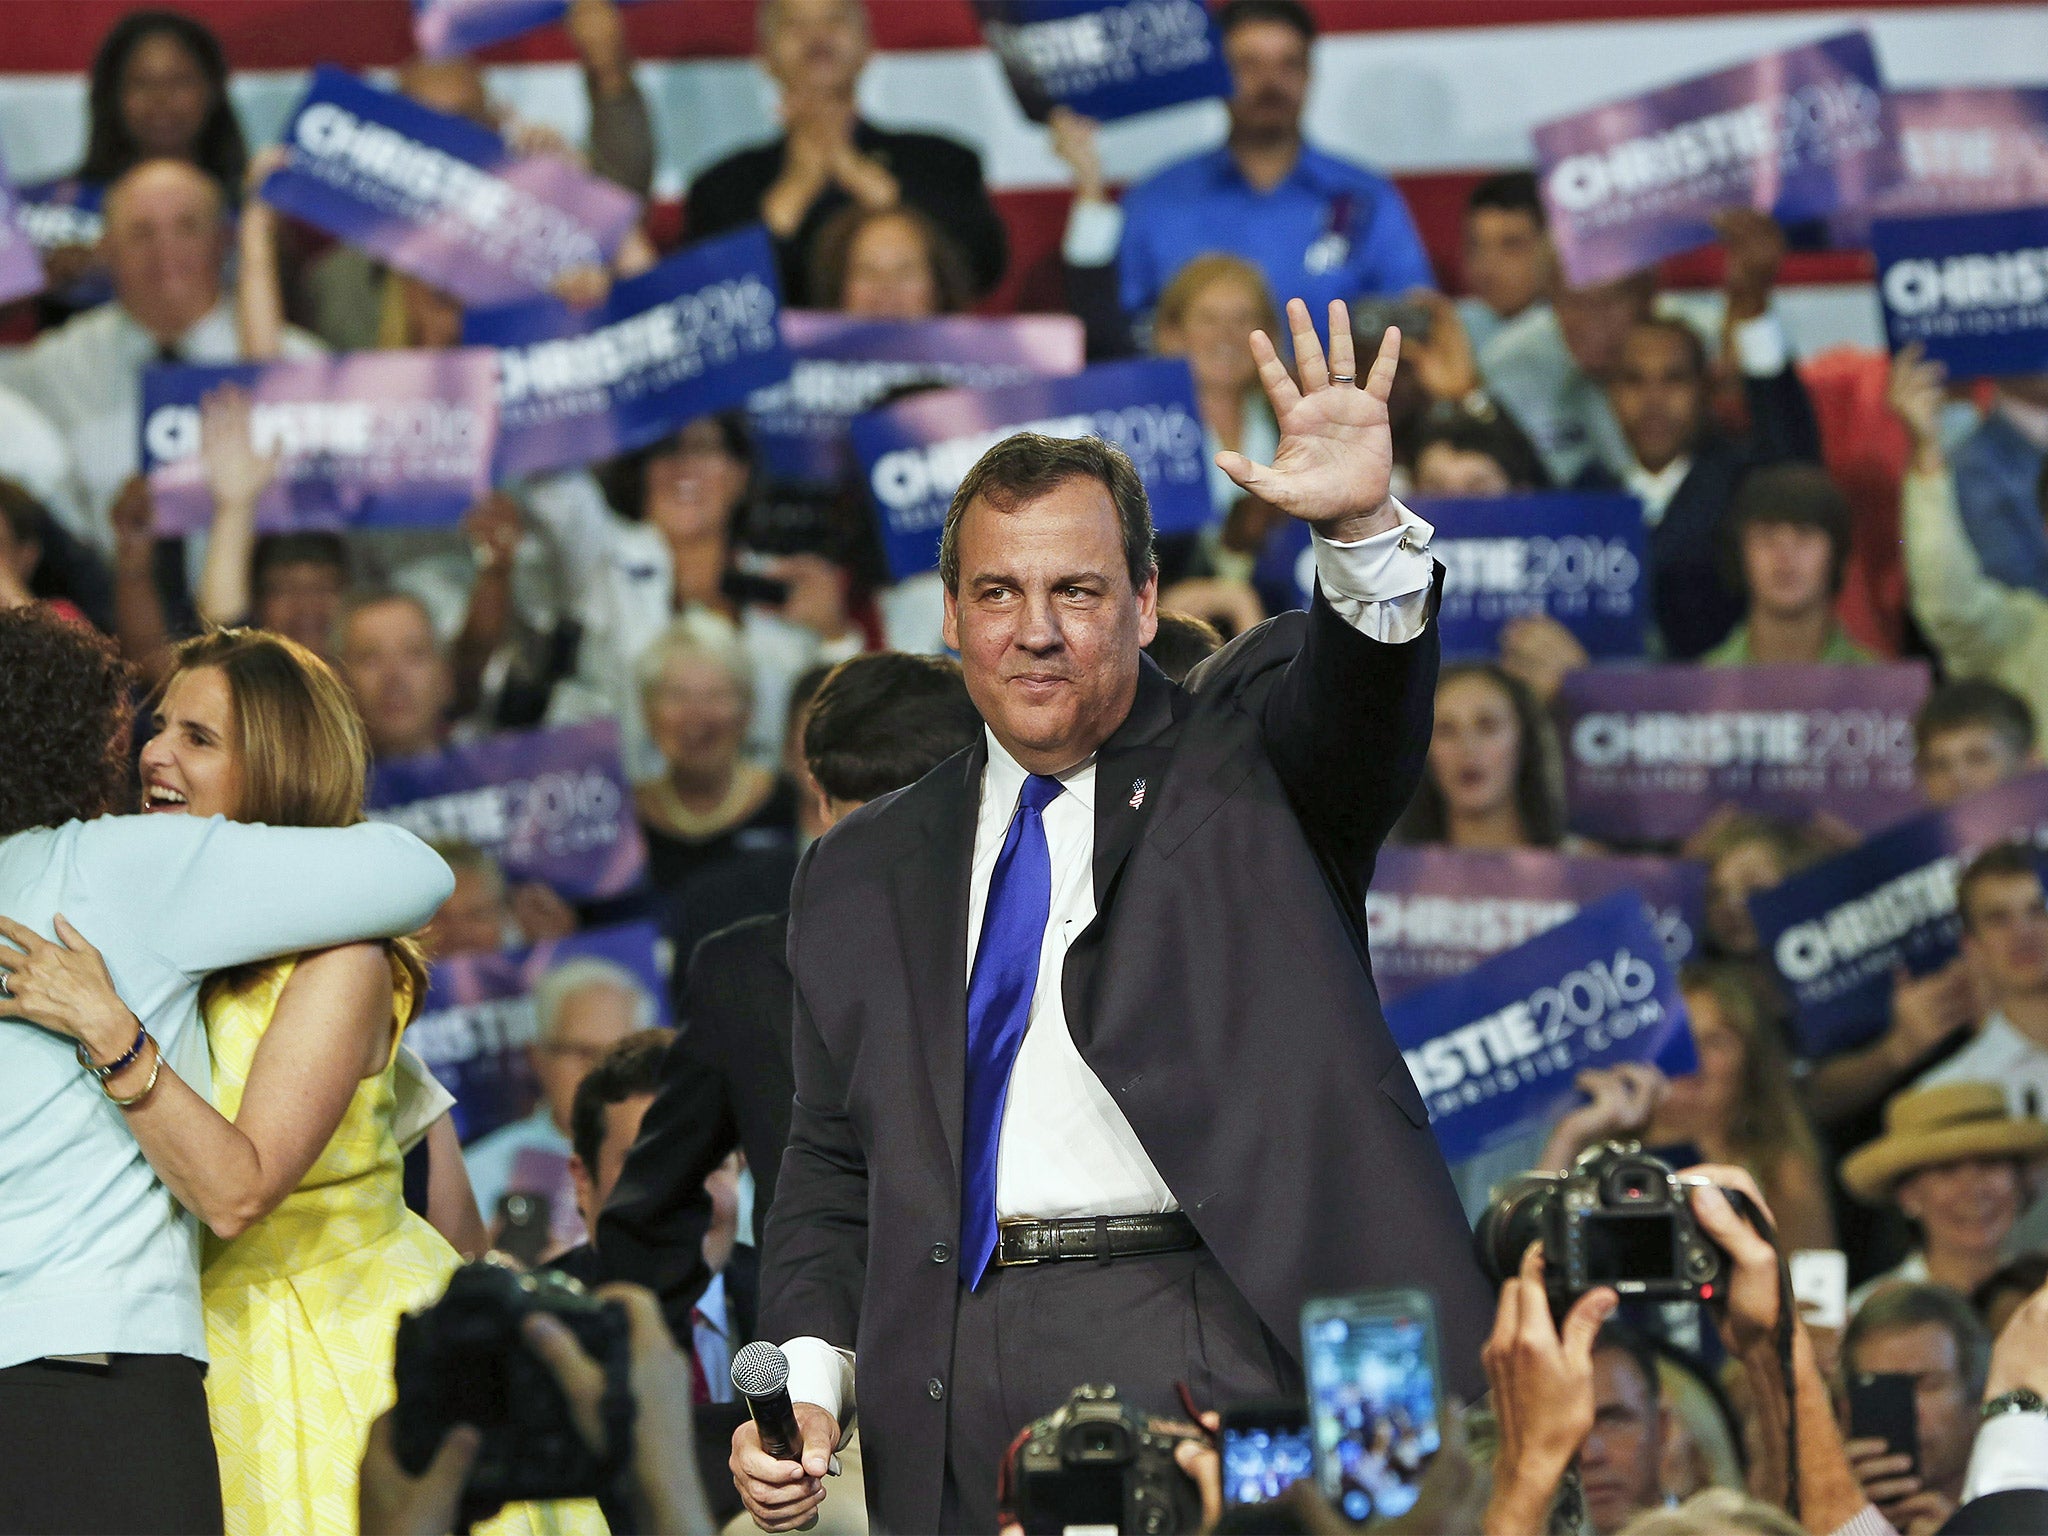 Chris Christie waves to supporters at the announcement of his candidacy for the Republican presidential nomination, in Livingston, New Jersey